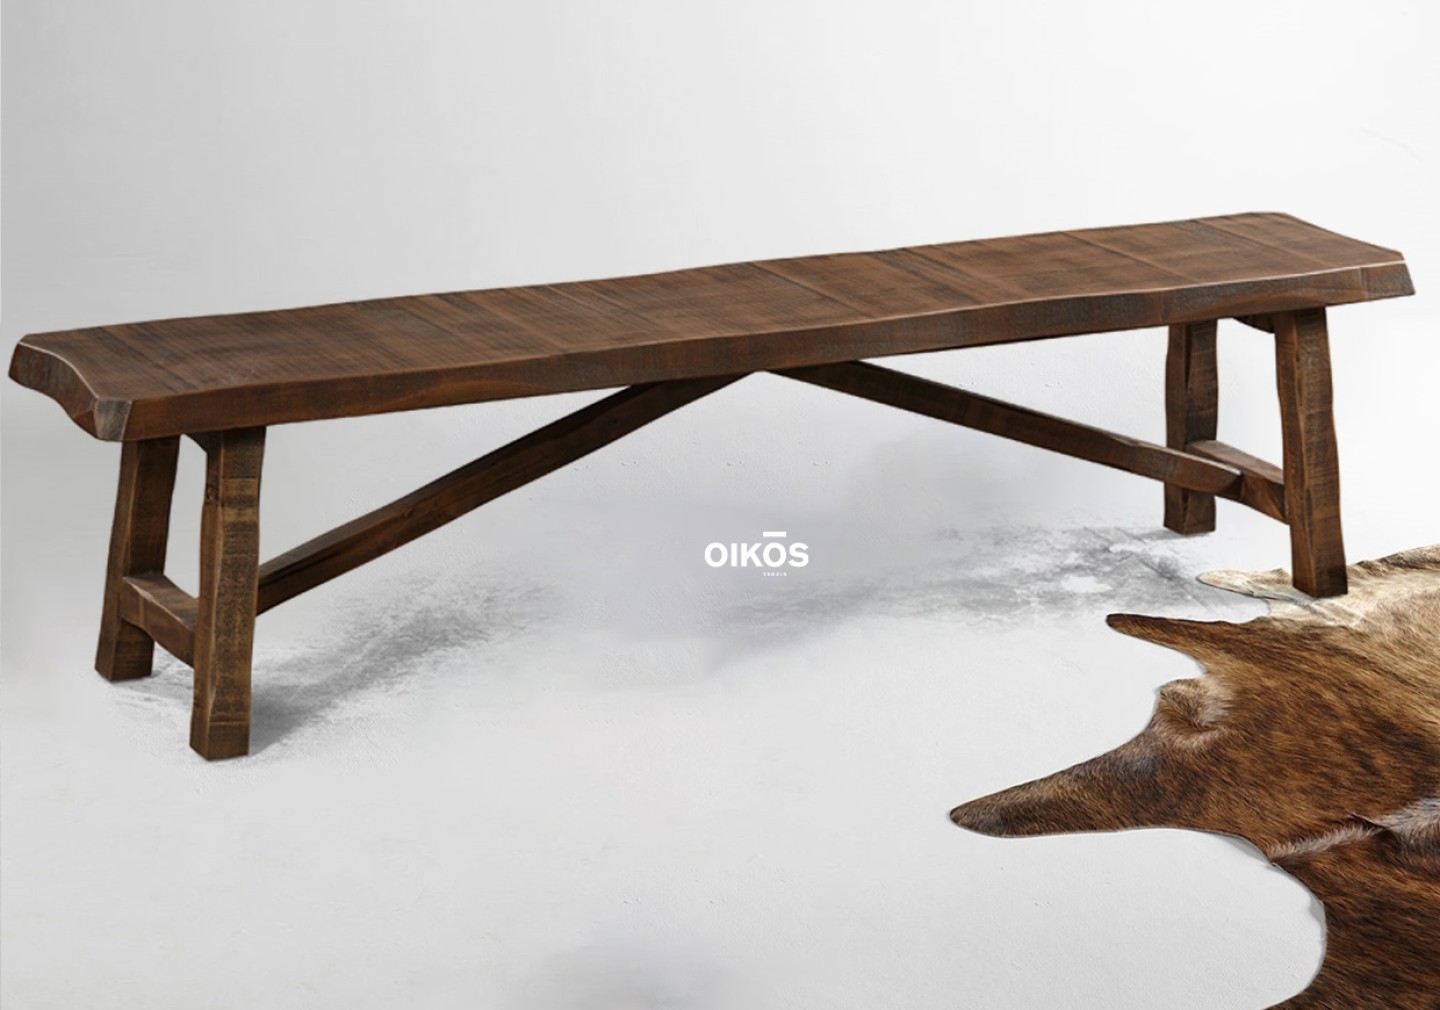 THE OWEN DINING BENCH